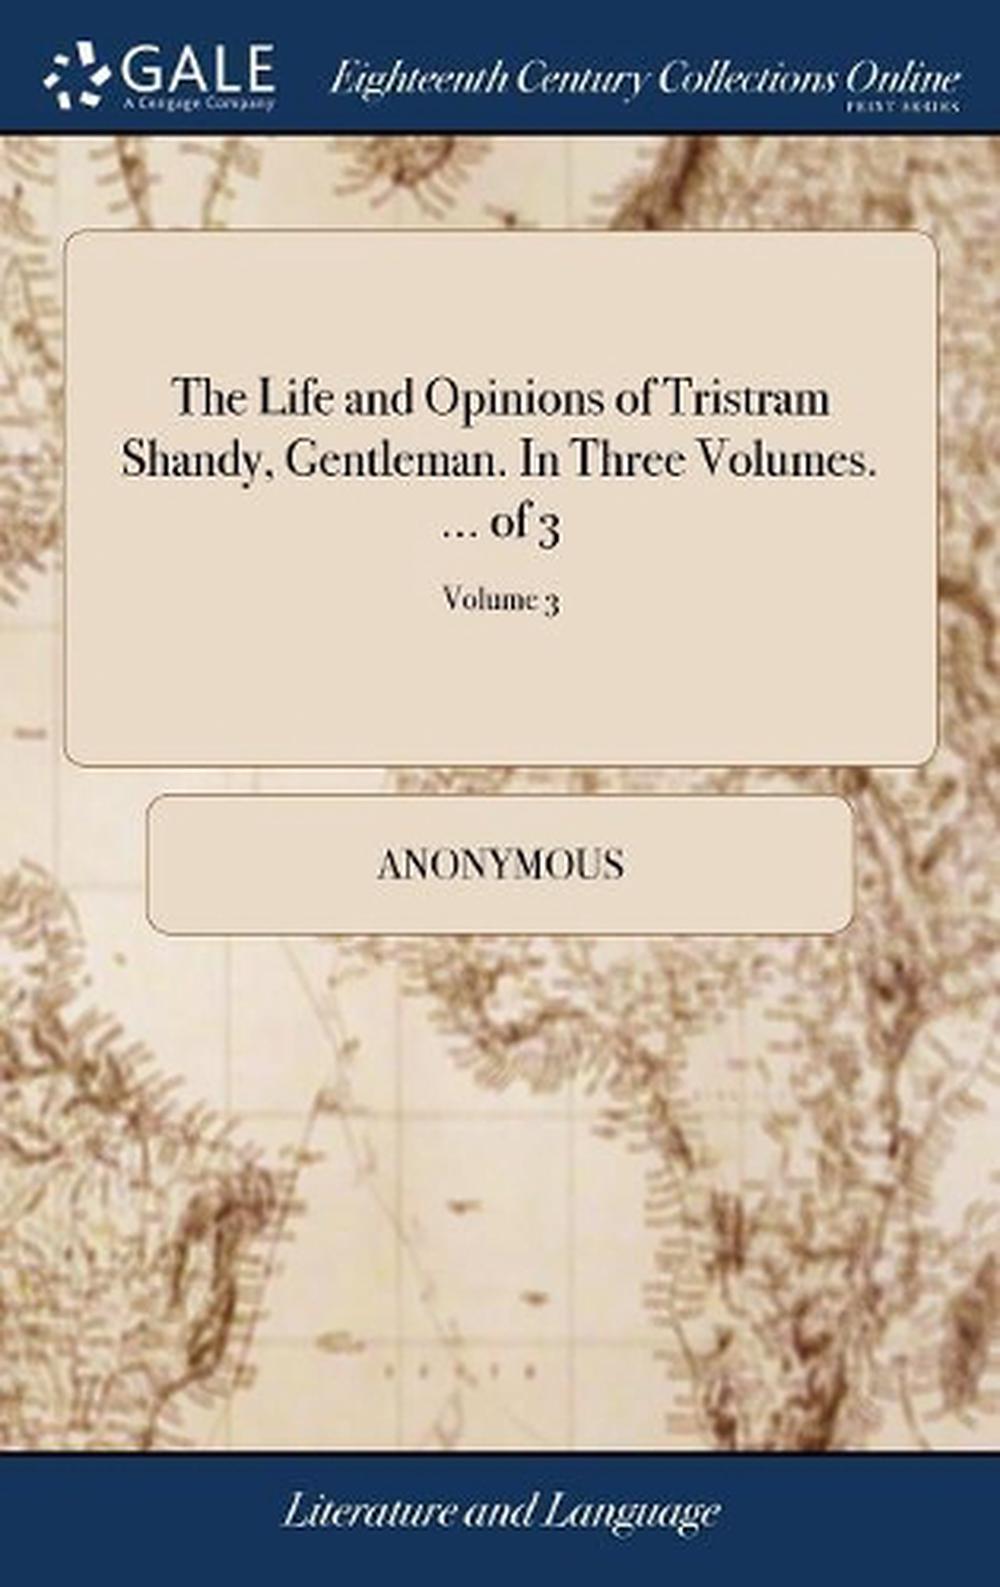 author of the life and opinions of tristram shandy gentleman